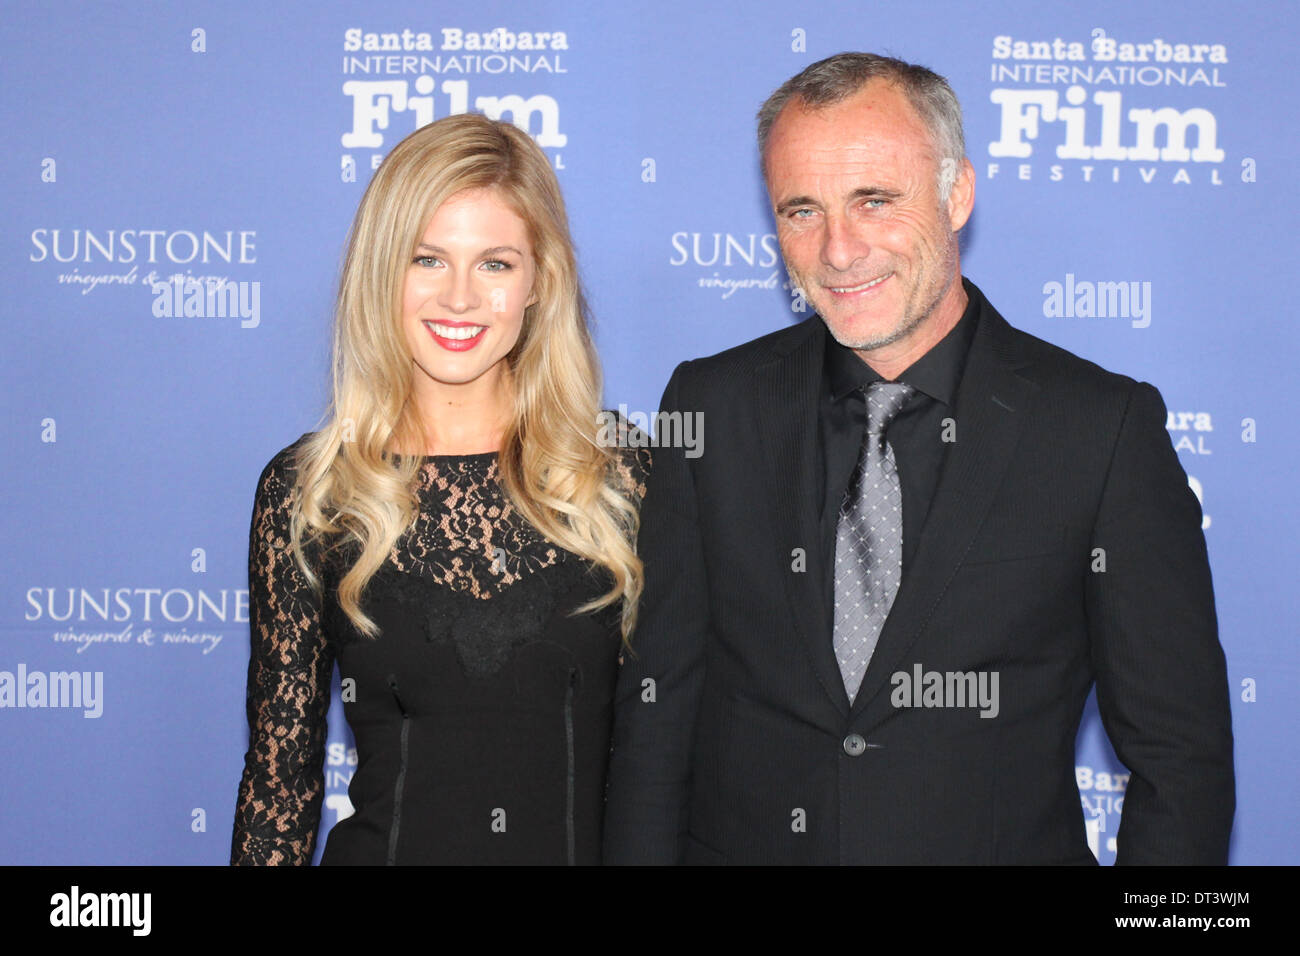 Caitlin Manley and Timothy V. Murphy (Sons of Anarchy) walk the red carpet at the Santa Barbara International Film Festival. Stock Photo